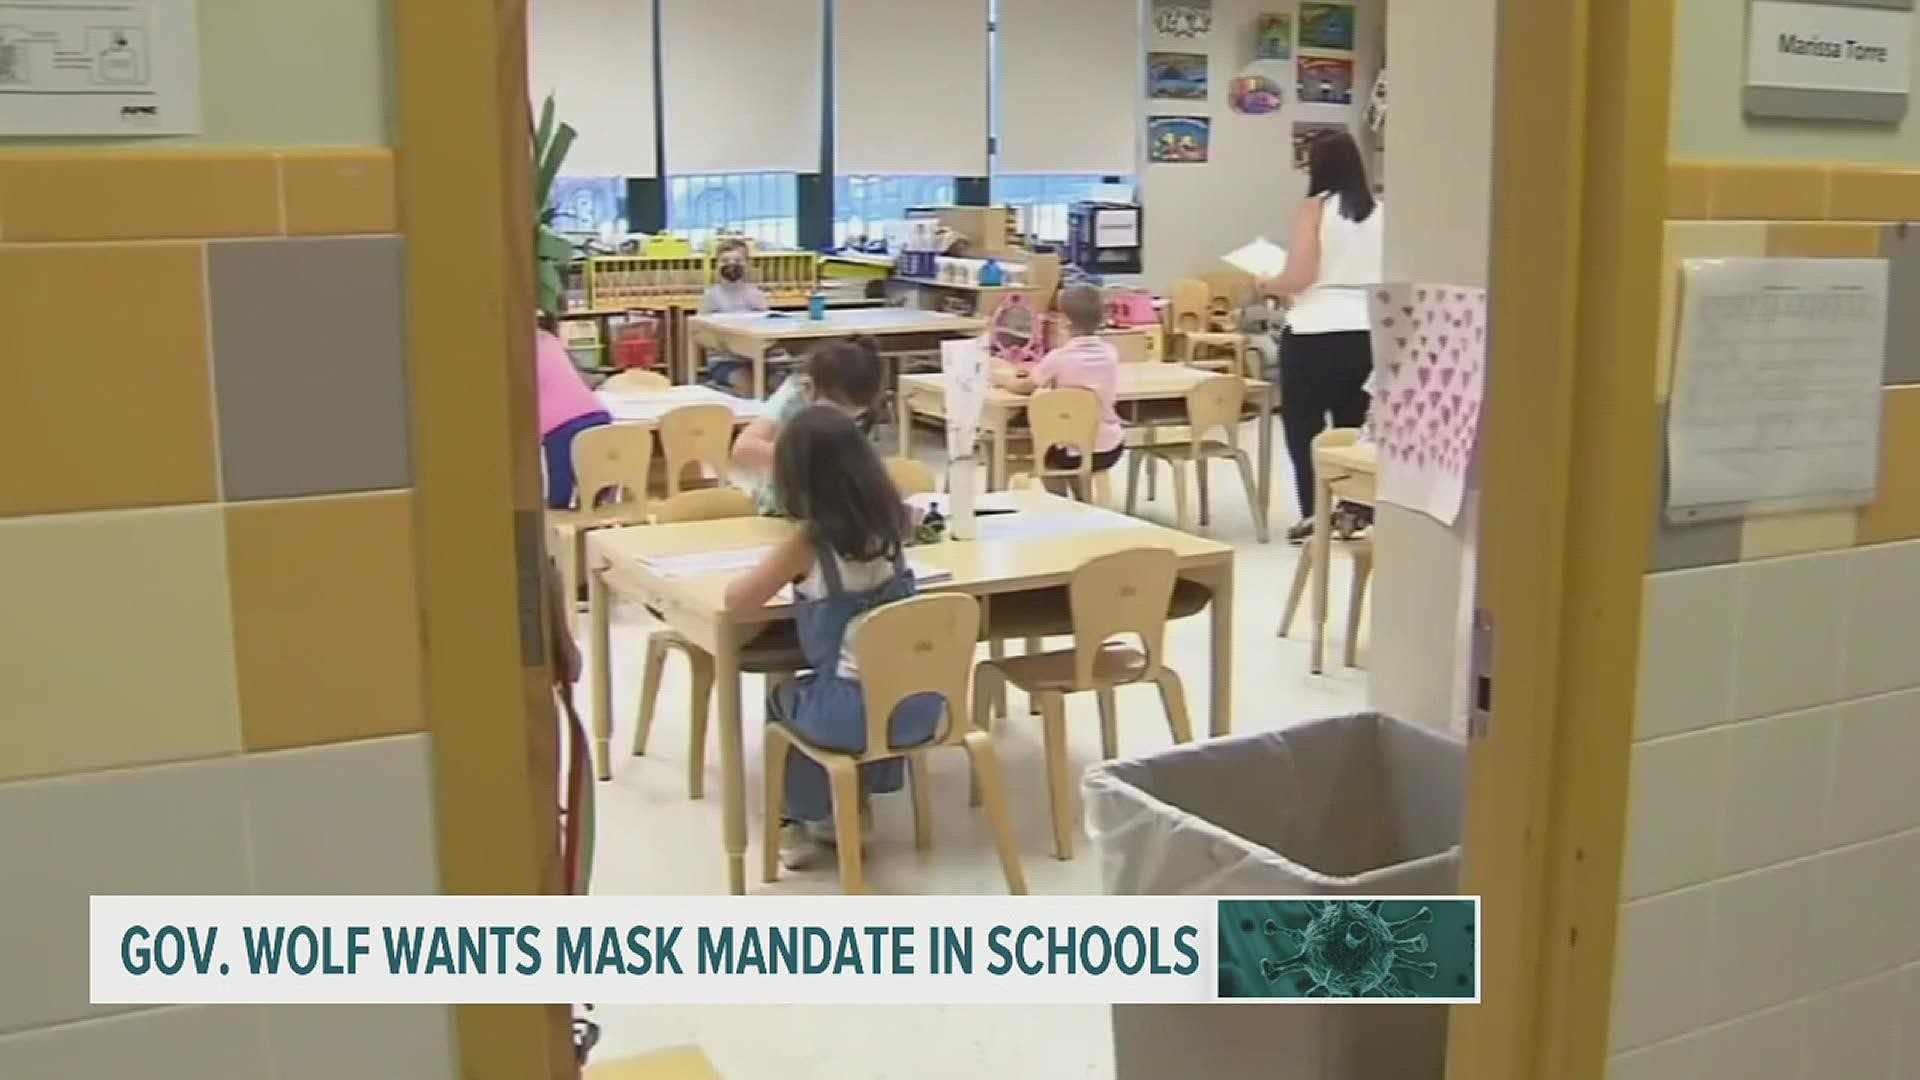 Wolf wrote in a letter that lawmakers should be called back to Harrisburg immediately to work on a bill to order schools and child care facilities to require masks.